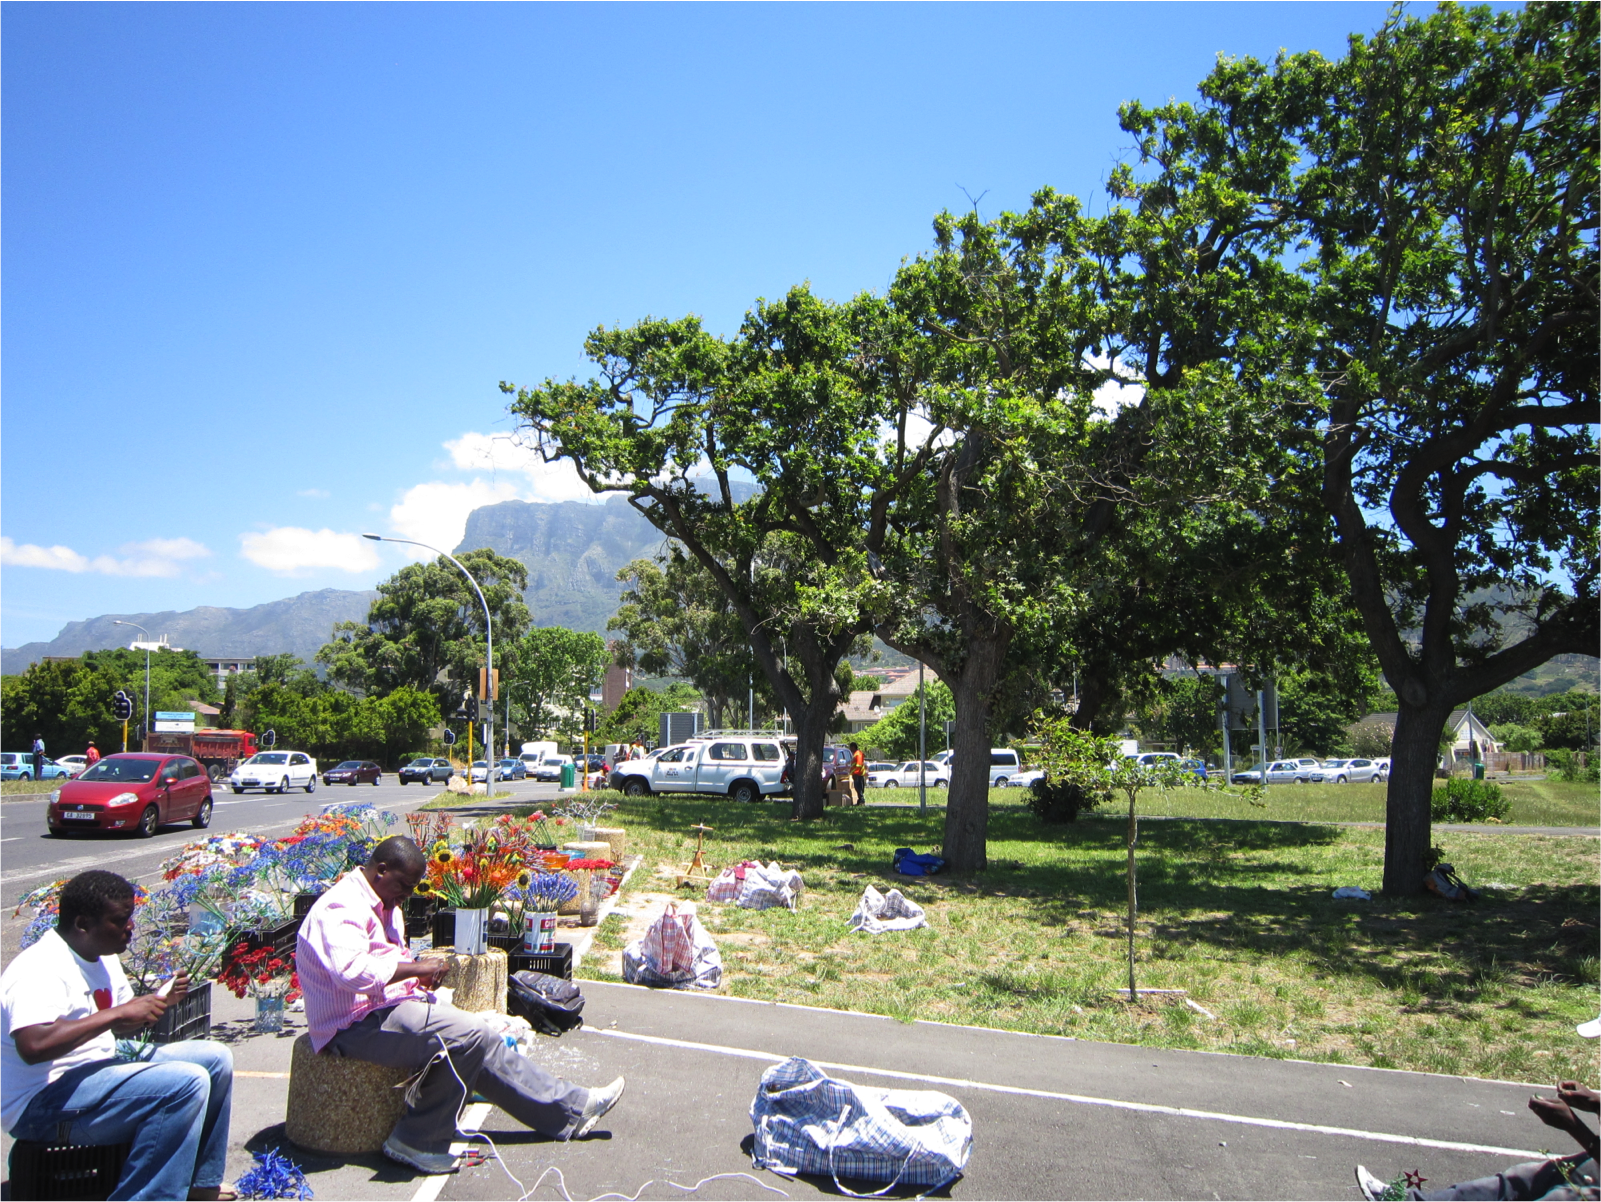 For the study, samples of heartwood from trees in major cities such as here in Cape Town were taken and analyzed. (Photo: TUM)